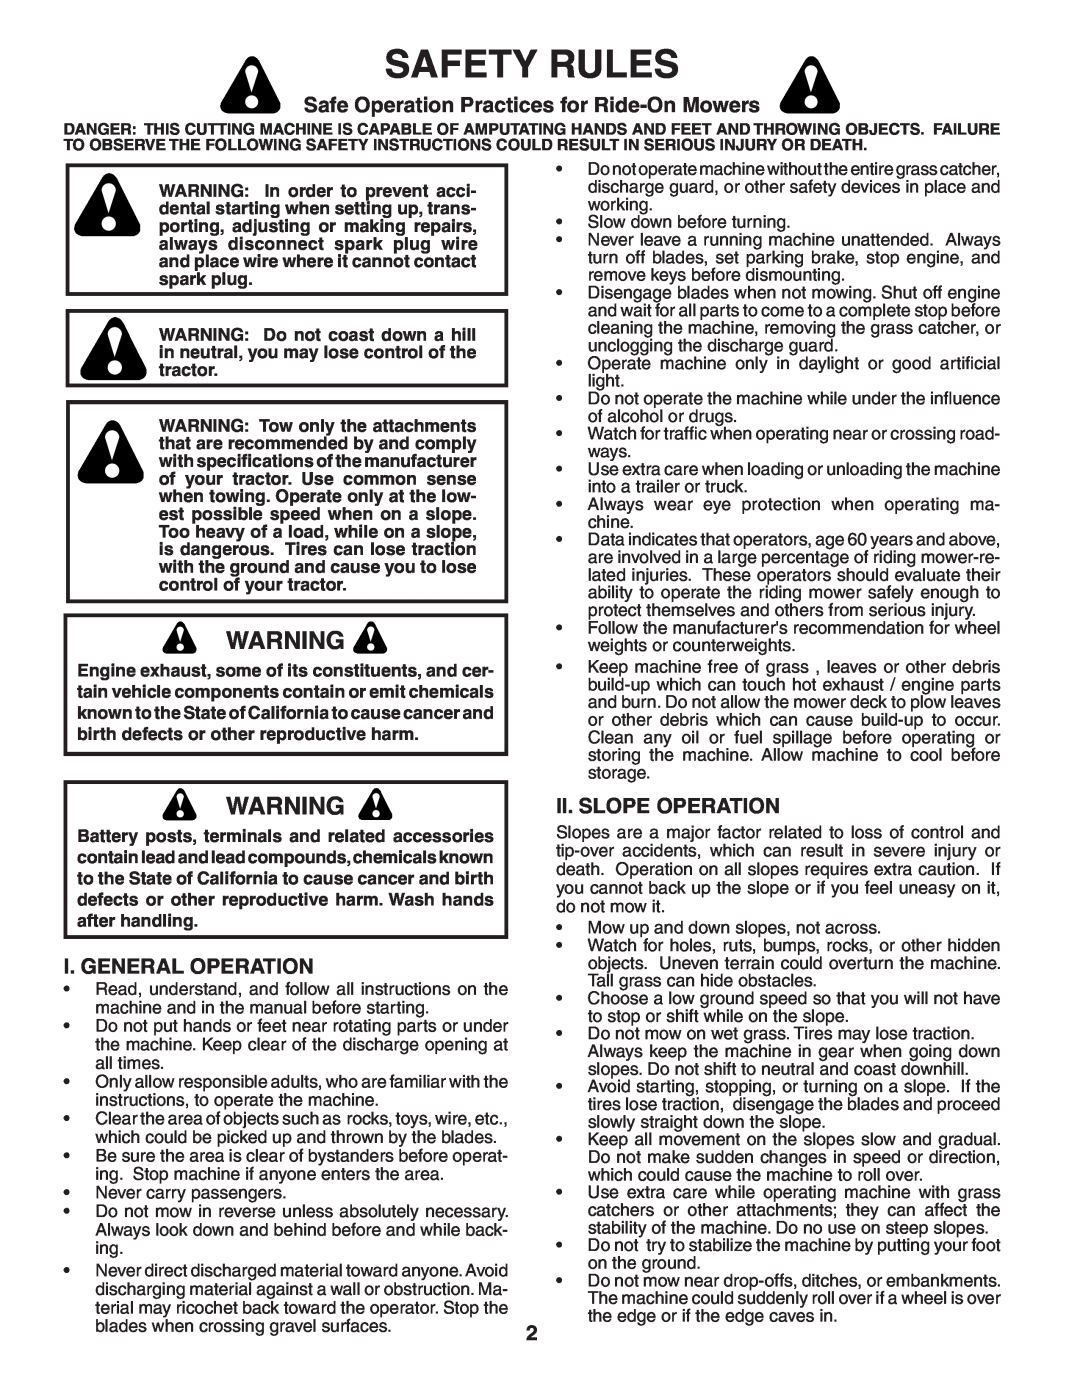 Poulan PB18H42LT manual Safety Rules, Safe Operation Practices for Ride-OnMowers, I. General Operation, Ii. Slope Operation 